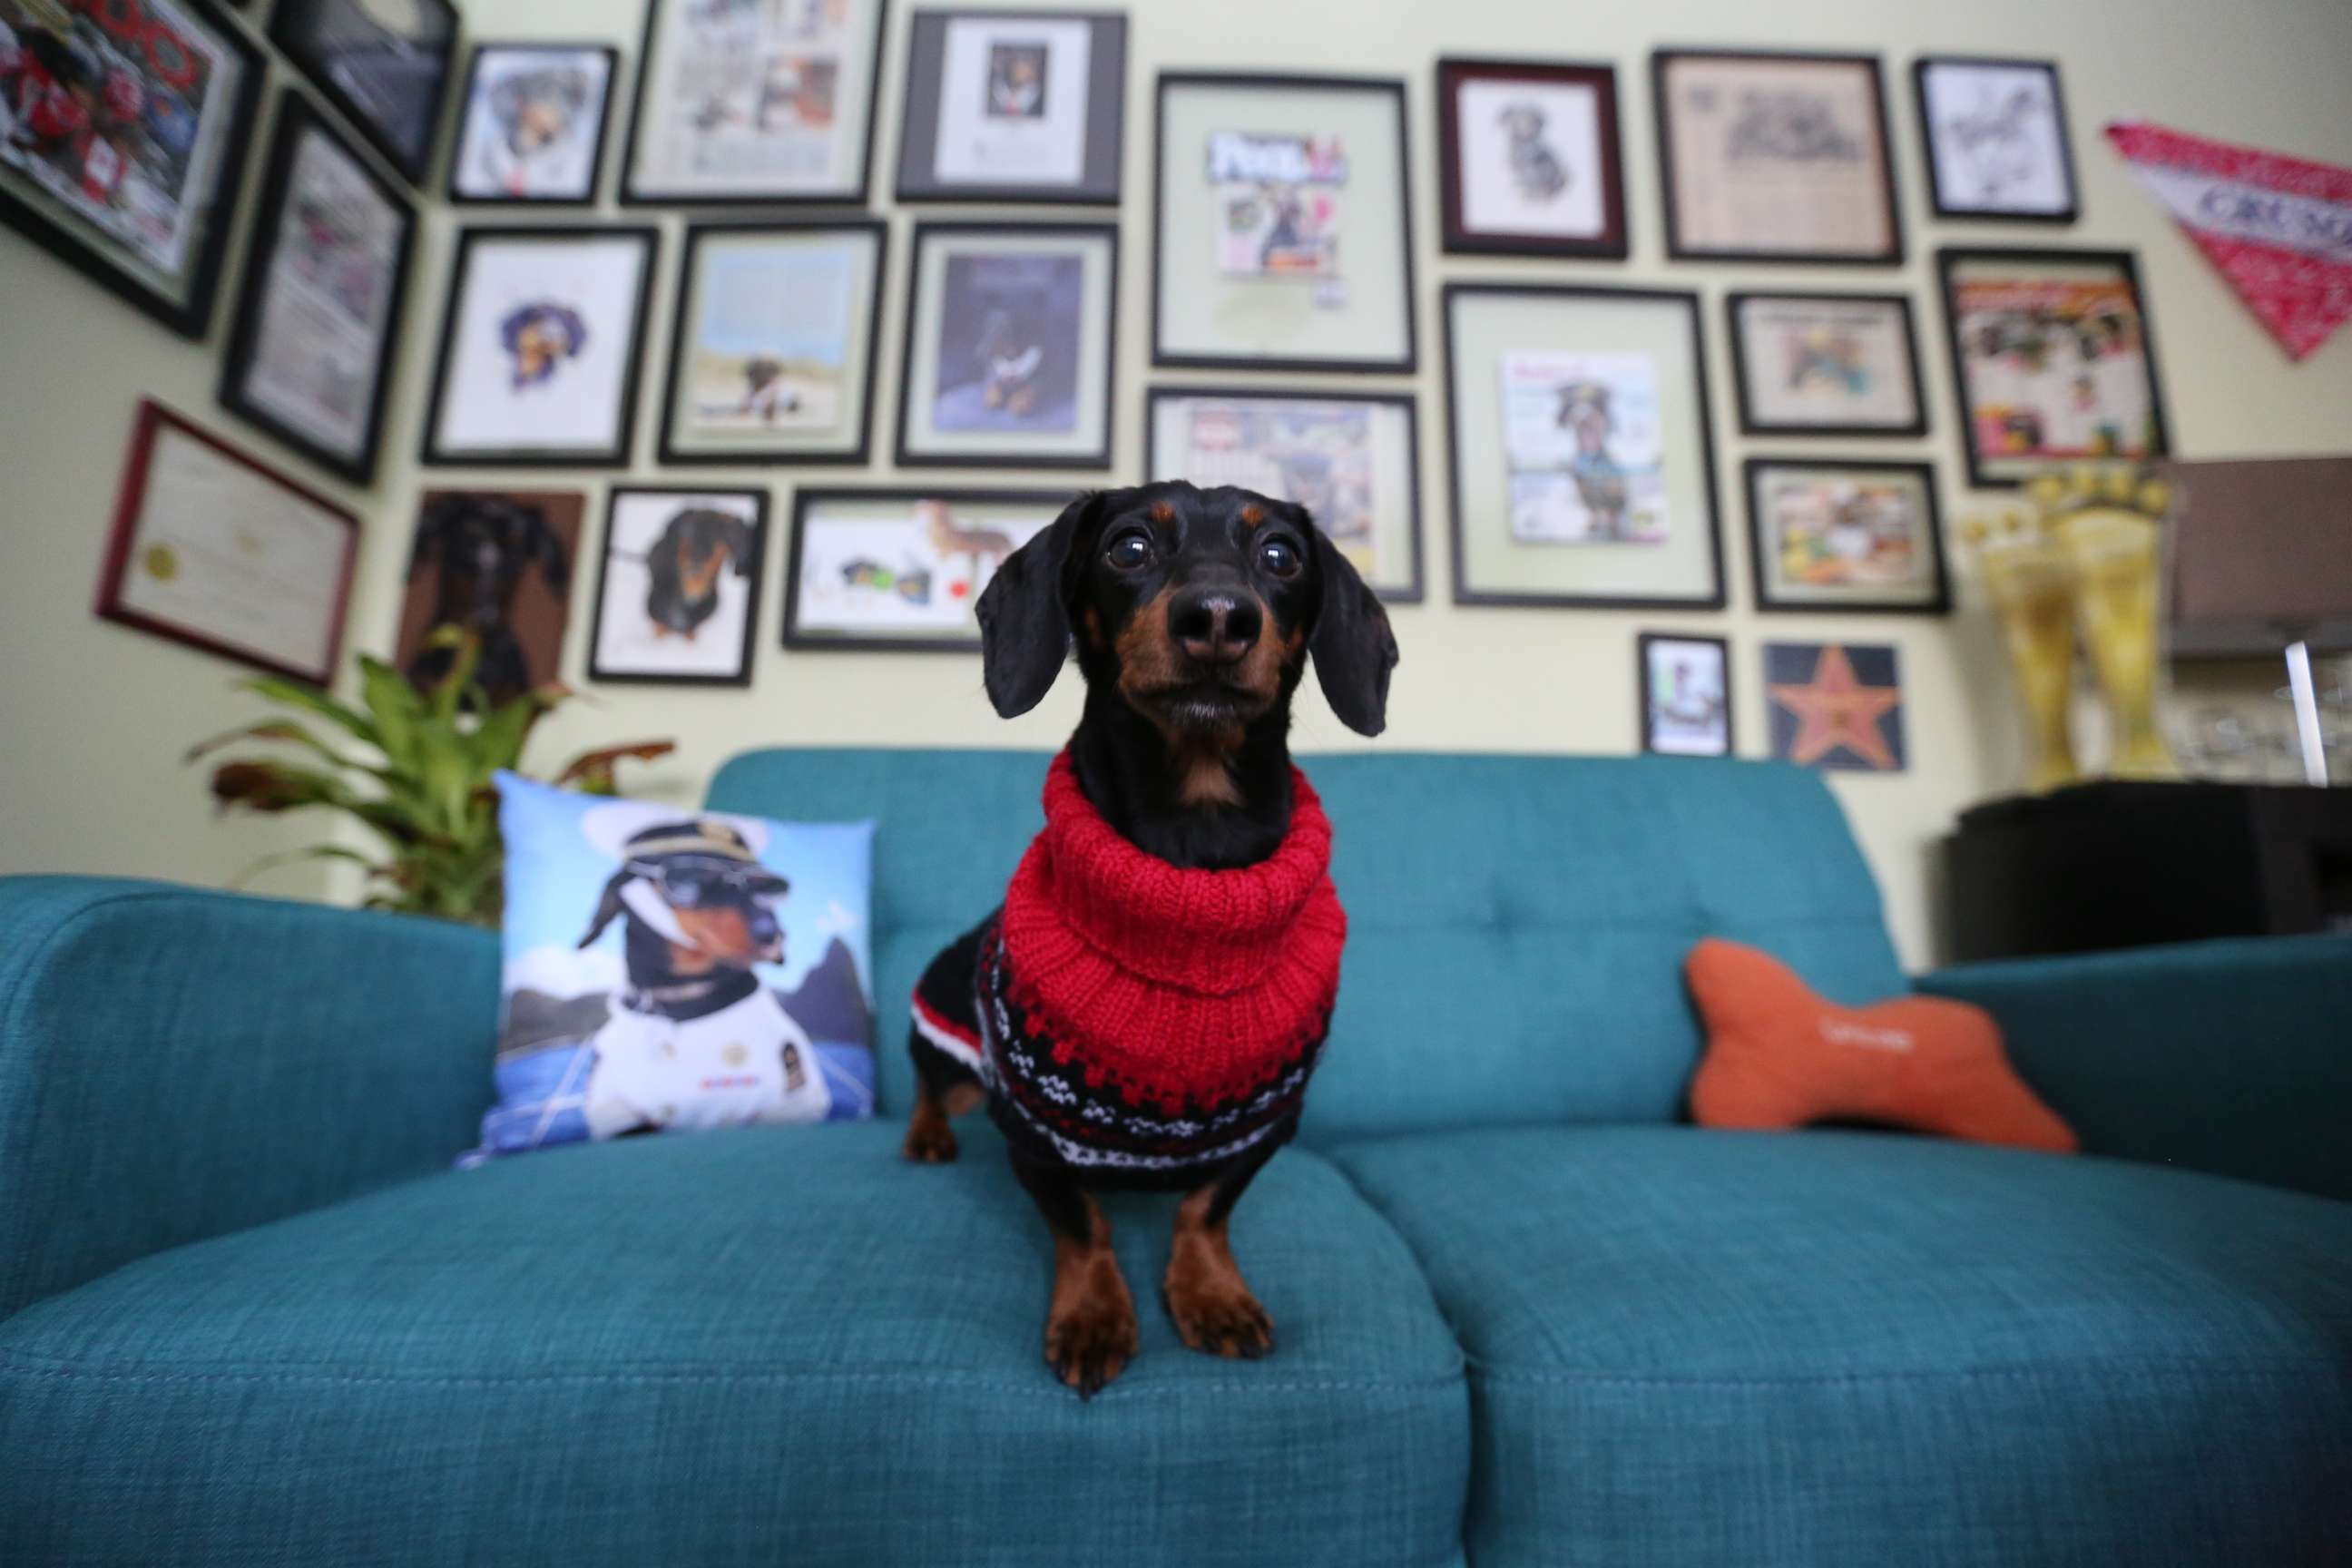 PHOTO: Crusoe, an internet-famous dachshund, poses in front of his wall of fame that is decorated with a collection of work that he's done.